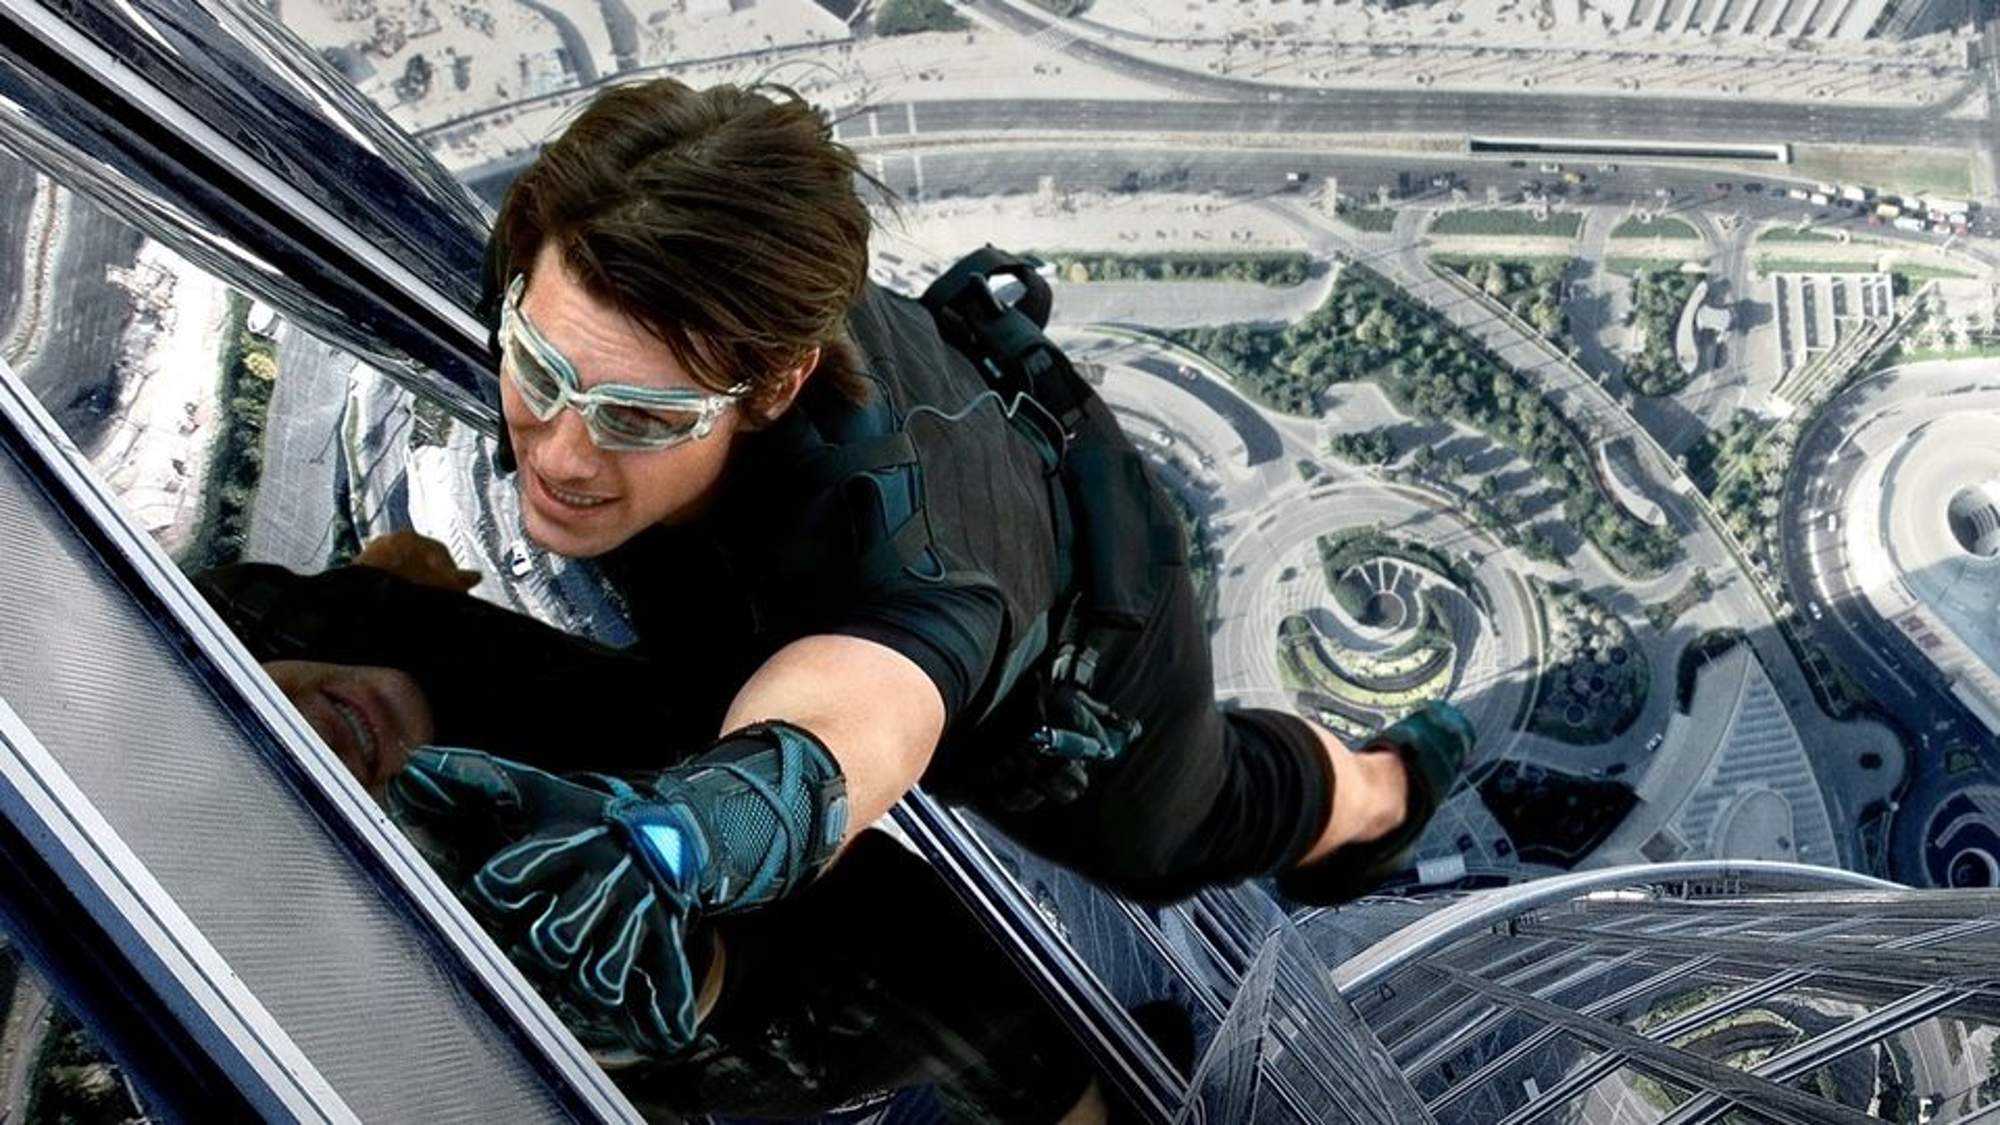 This Tom Cruise movie is climbing up the Netflix movie charts